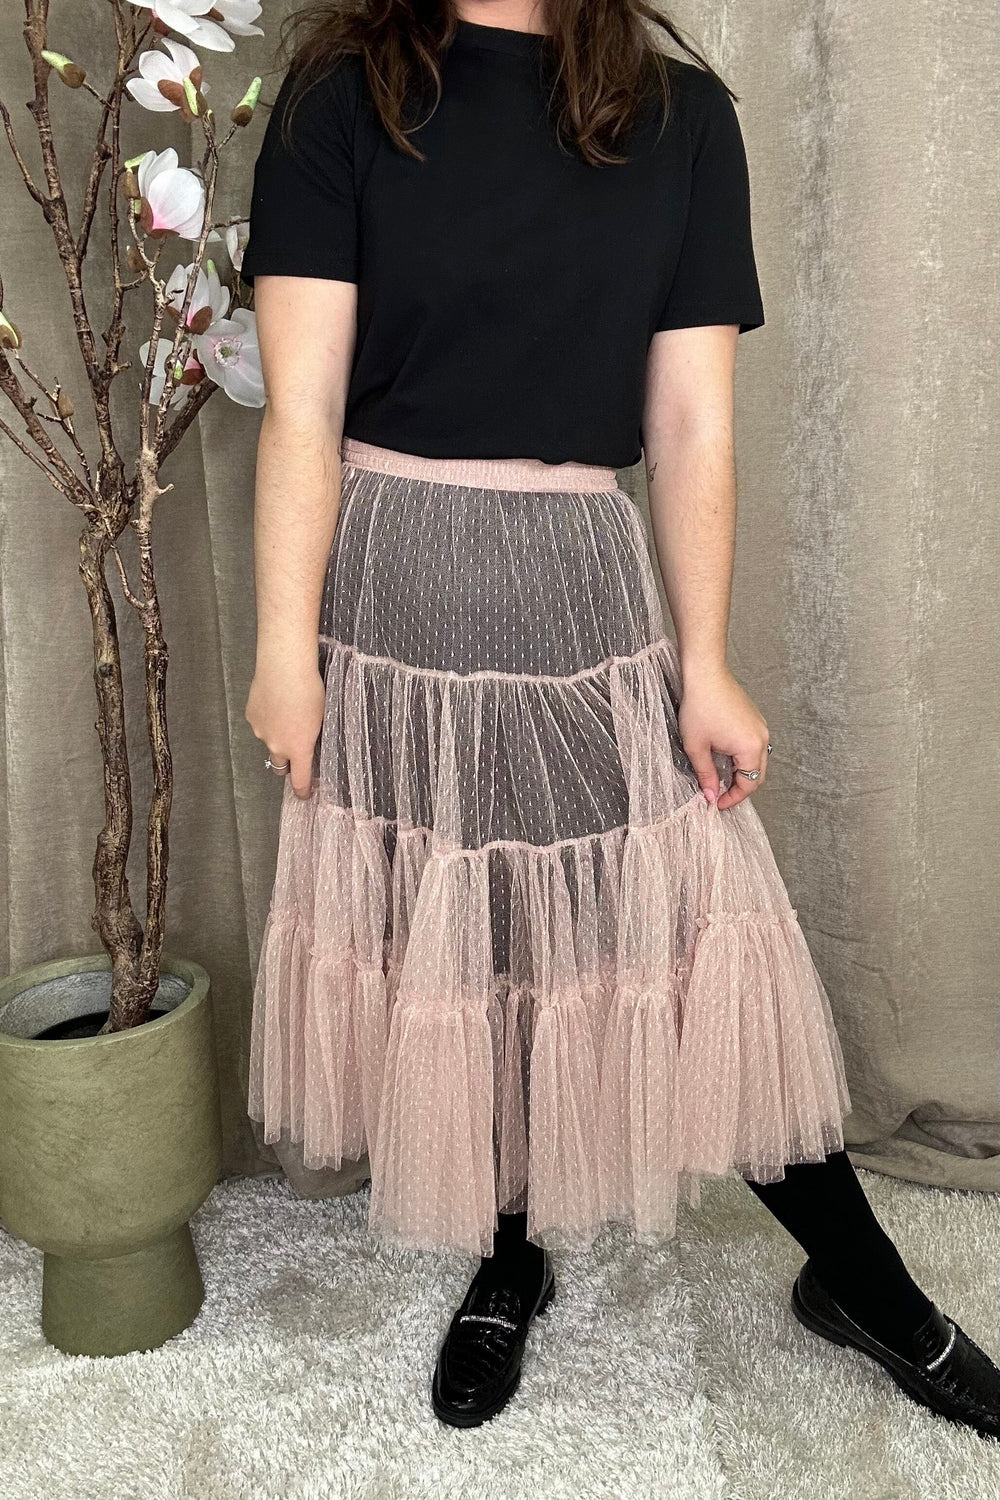 A-bee - Tulle Skirt 29693 - Pink Nederdele 